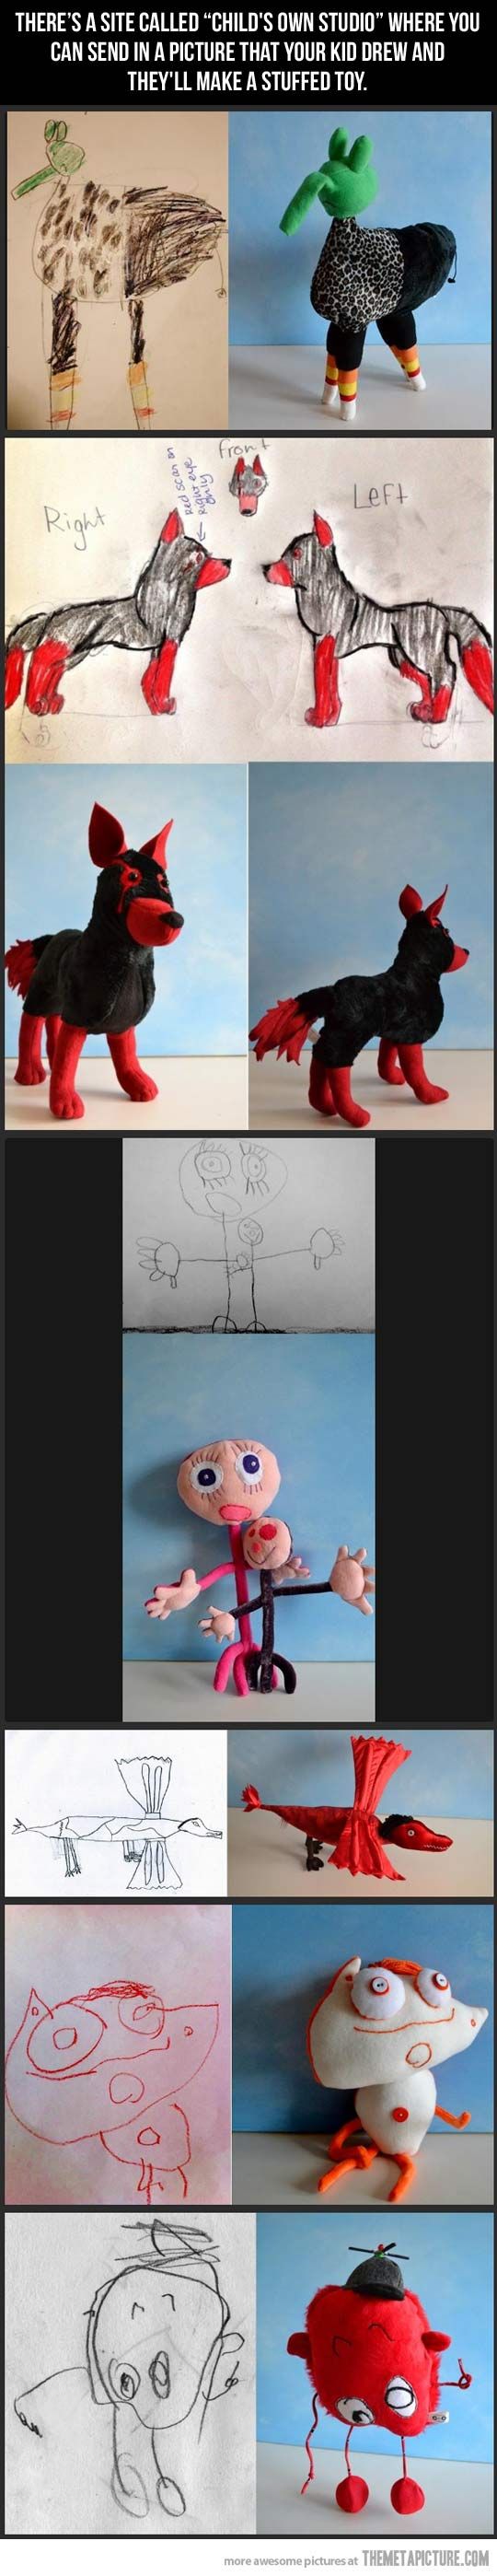 Children’s drawings become real…